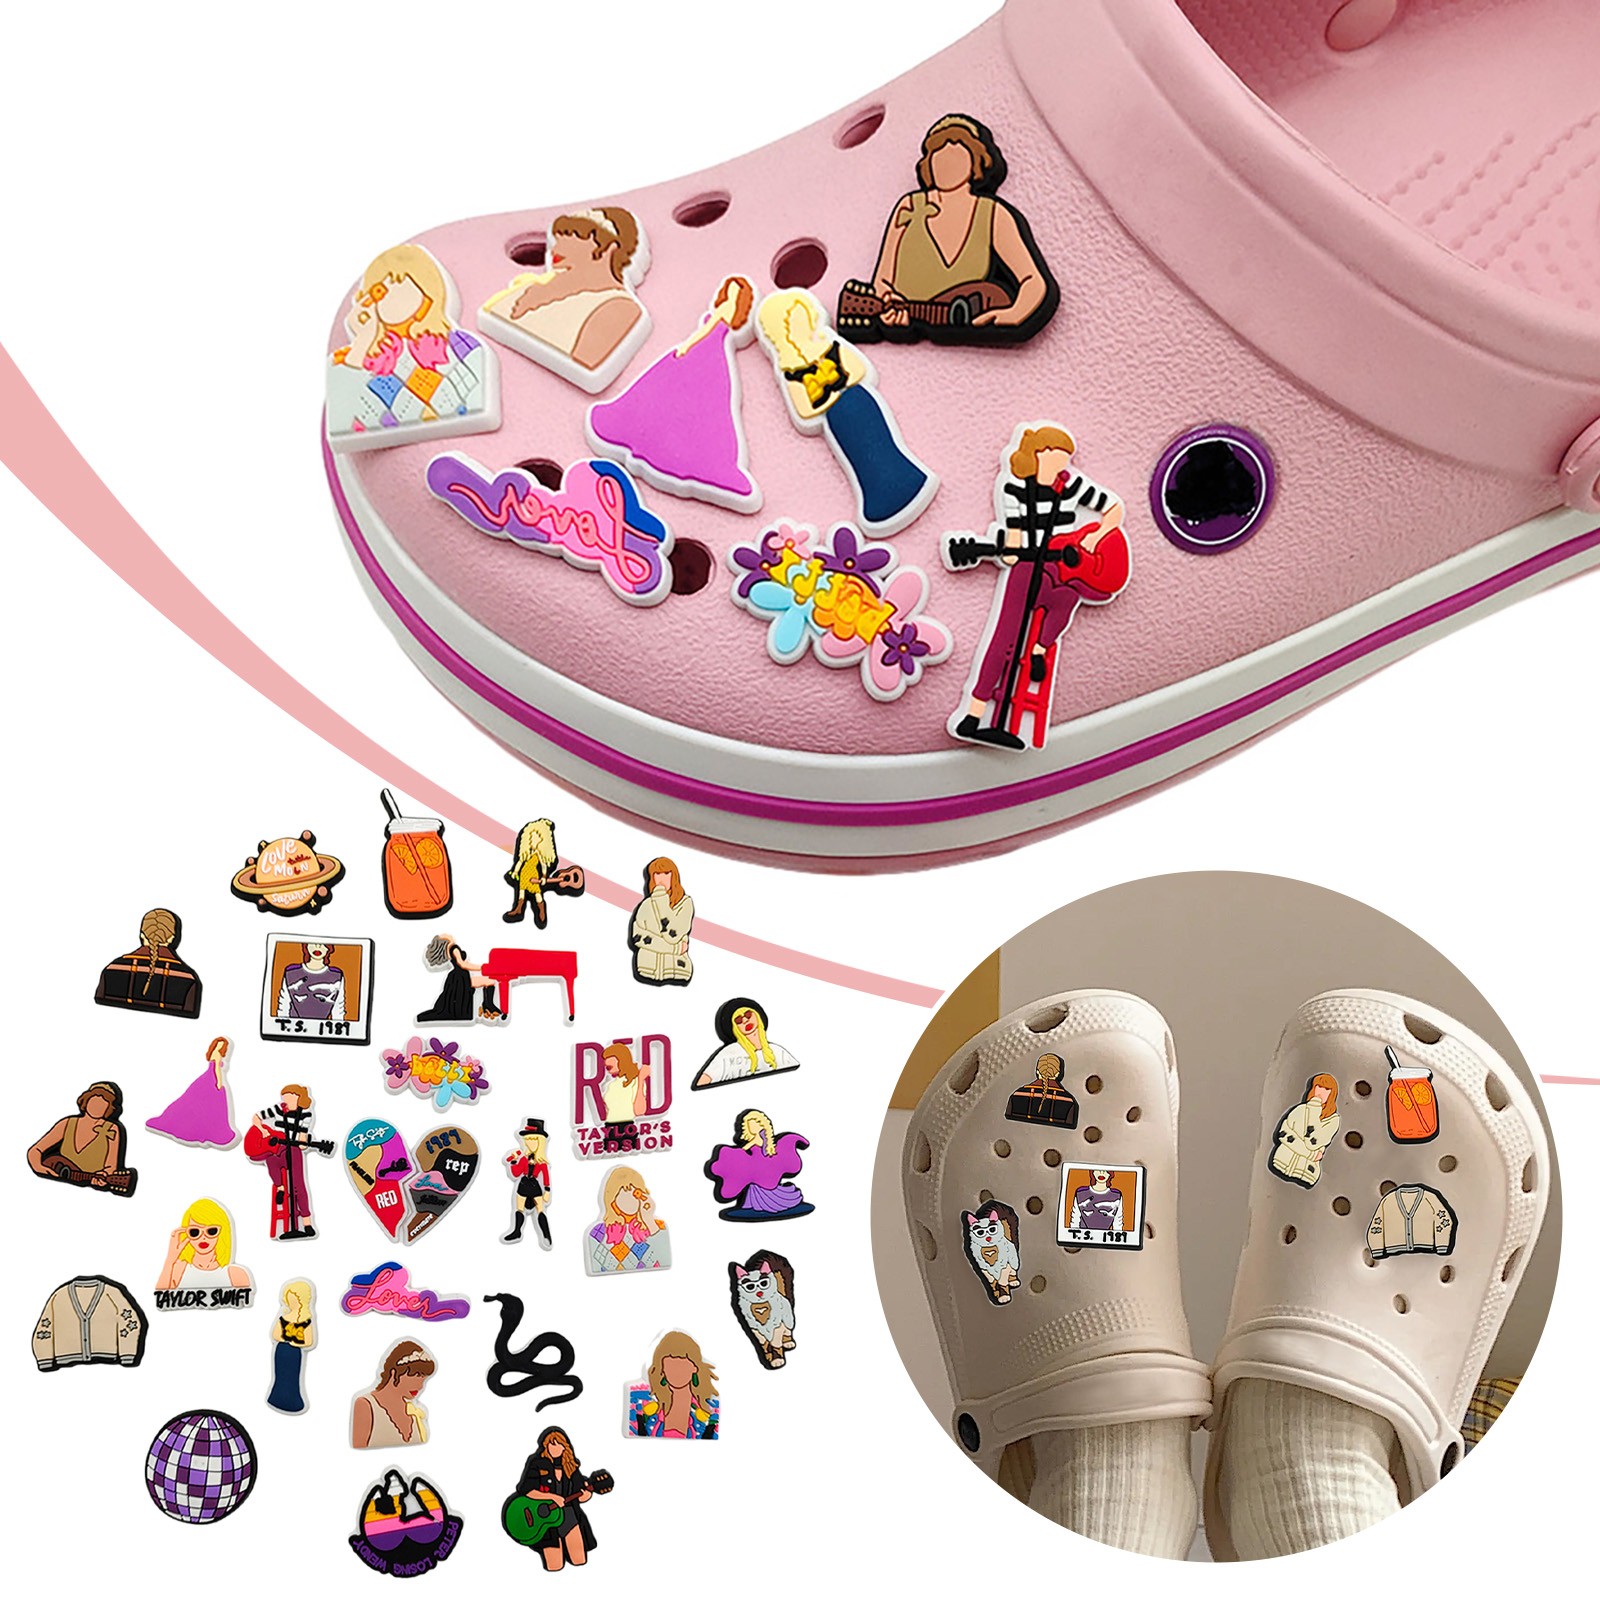 Taylor Swift Merch: Taylor Swift Croc Charms, Taylor Shoe Charms, 29 Pcs  Croc Charm TS Fits Any Shoes with Holes Best Gift for Fans Cartoon DIY Croc  Charm Party Accessories 